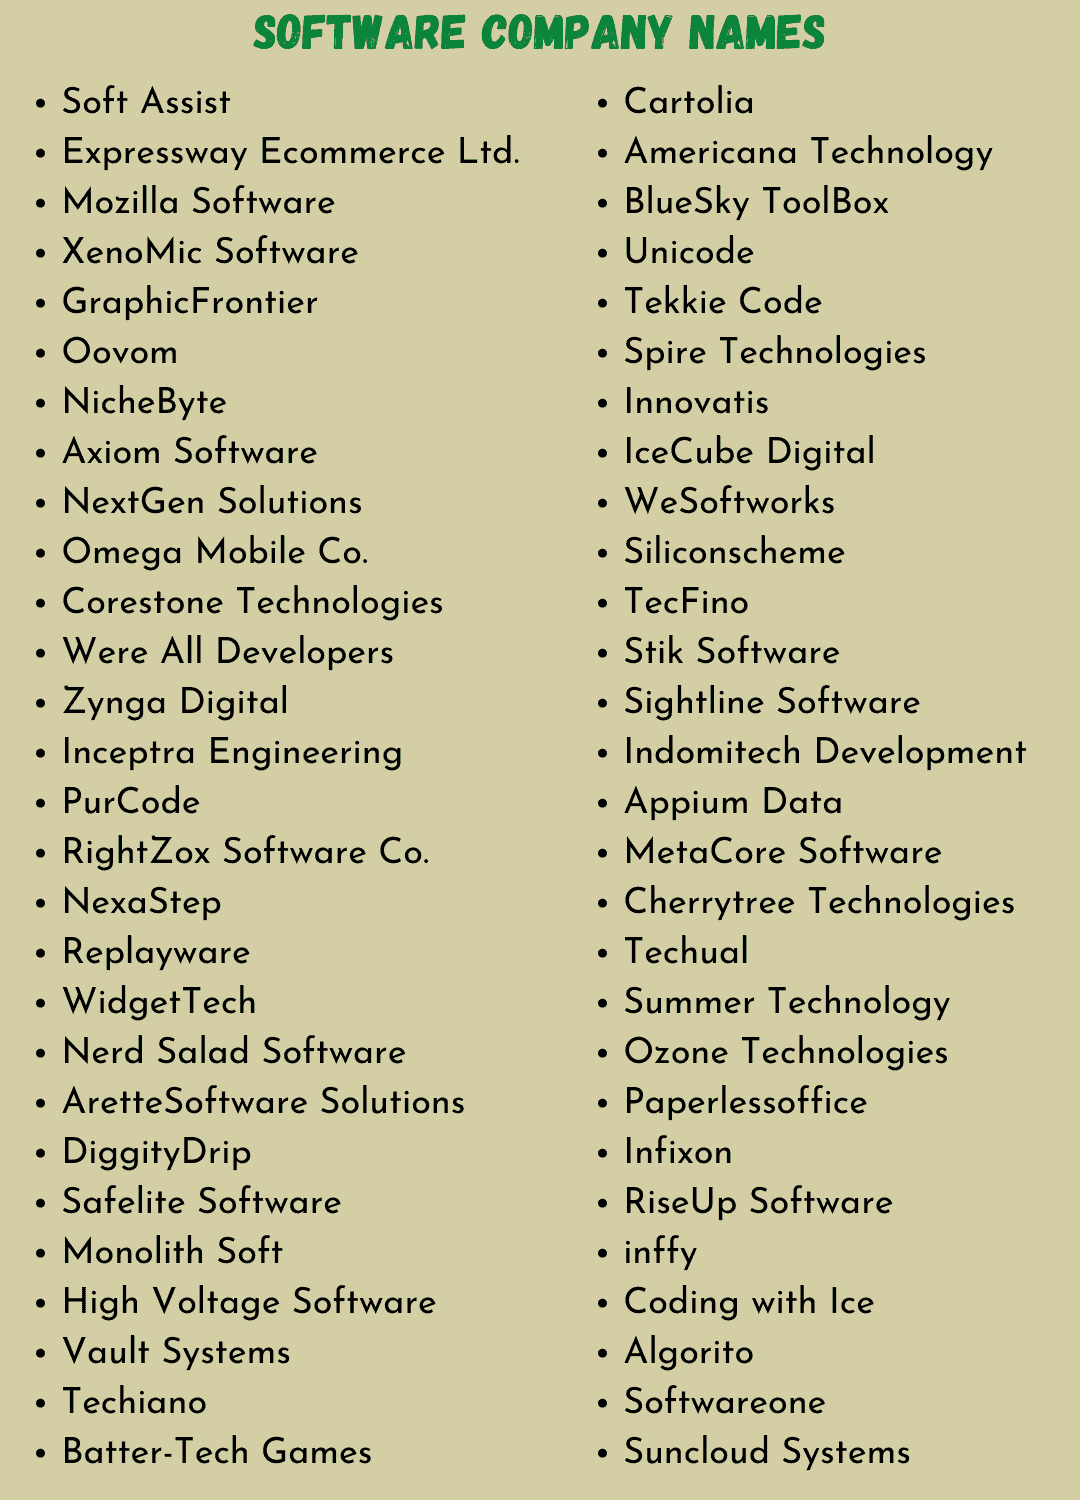 700 Cool Software Company Names for Your Next Project